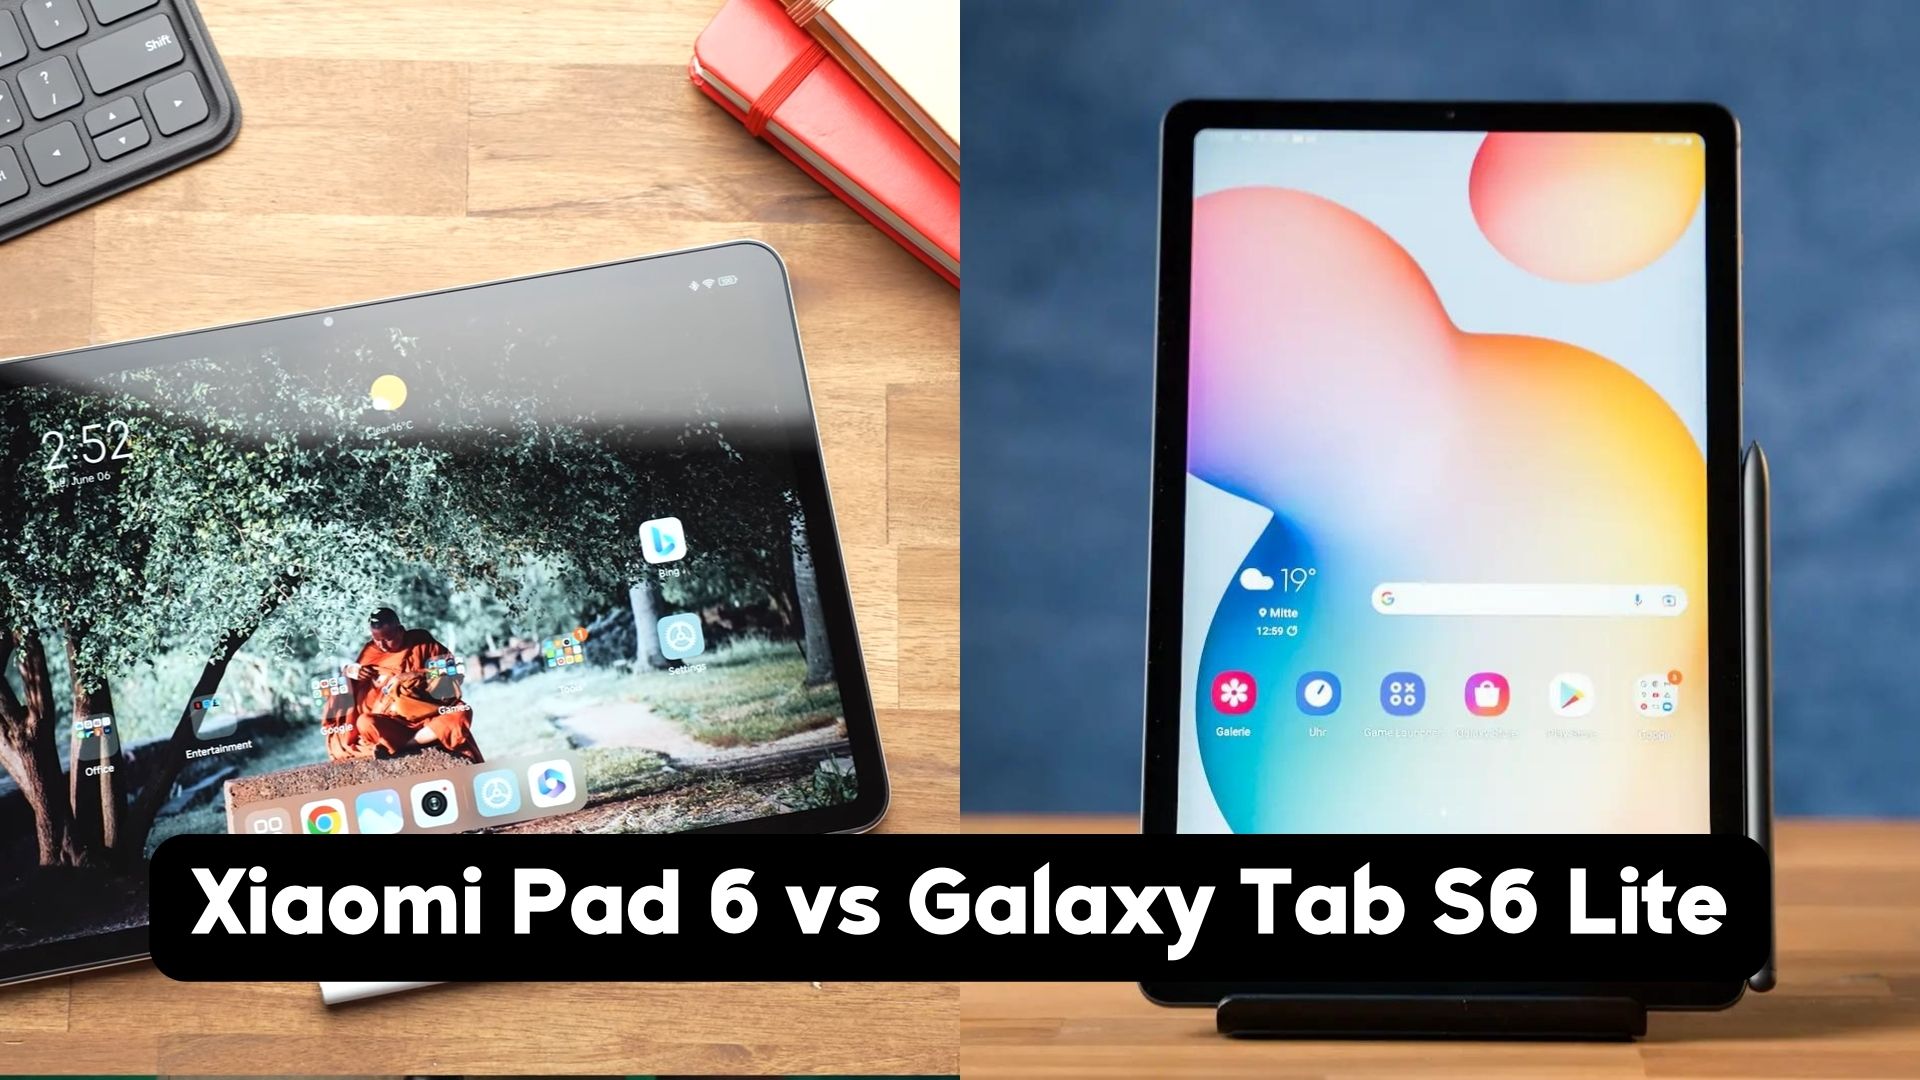 Xiaomi Pad 6 vs Galaxy Tab S6 Lite: Which is Better?